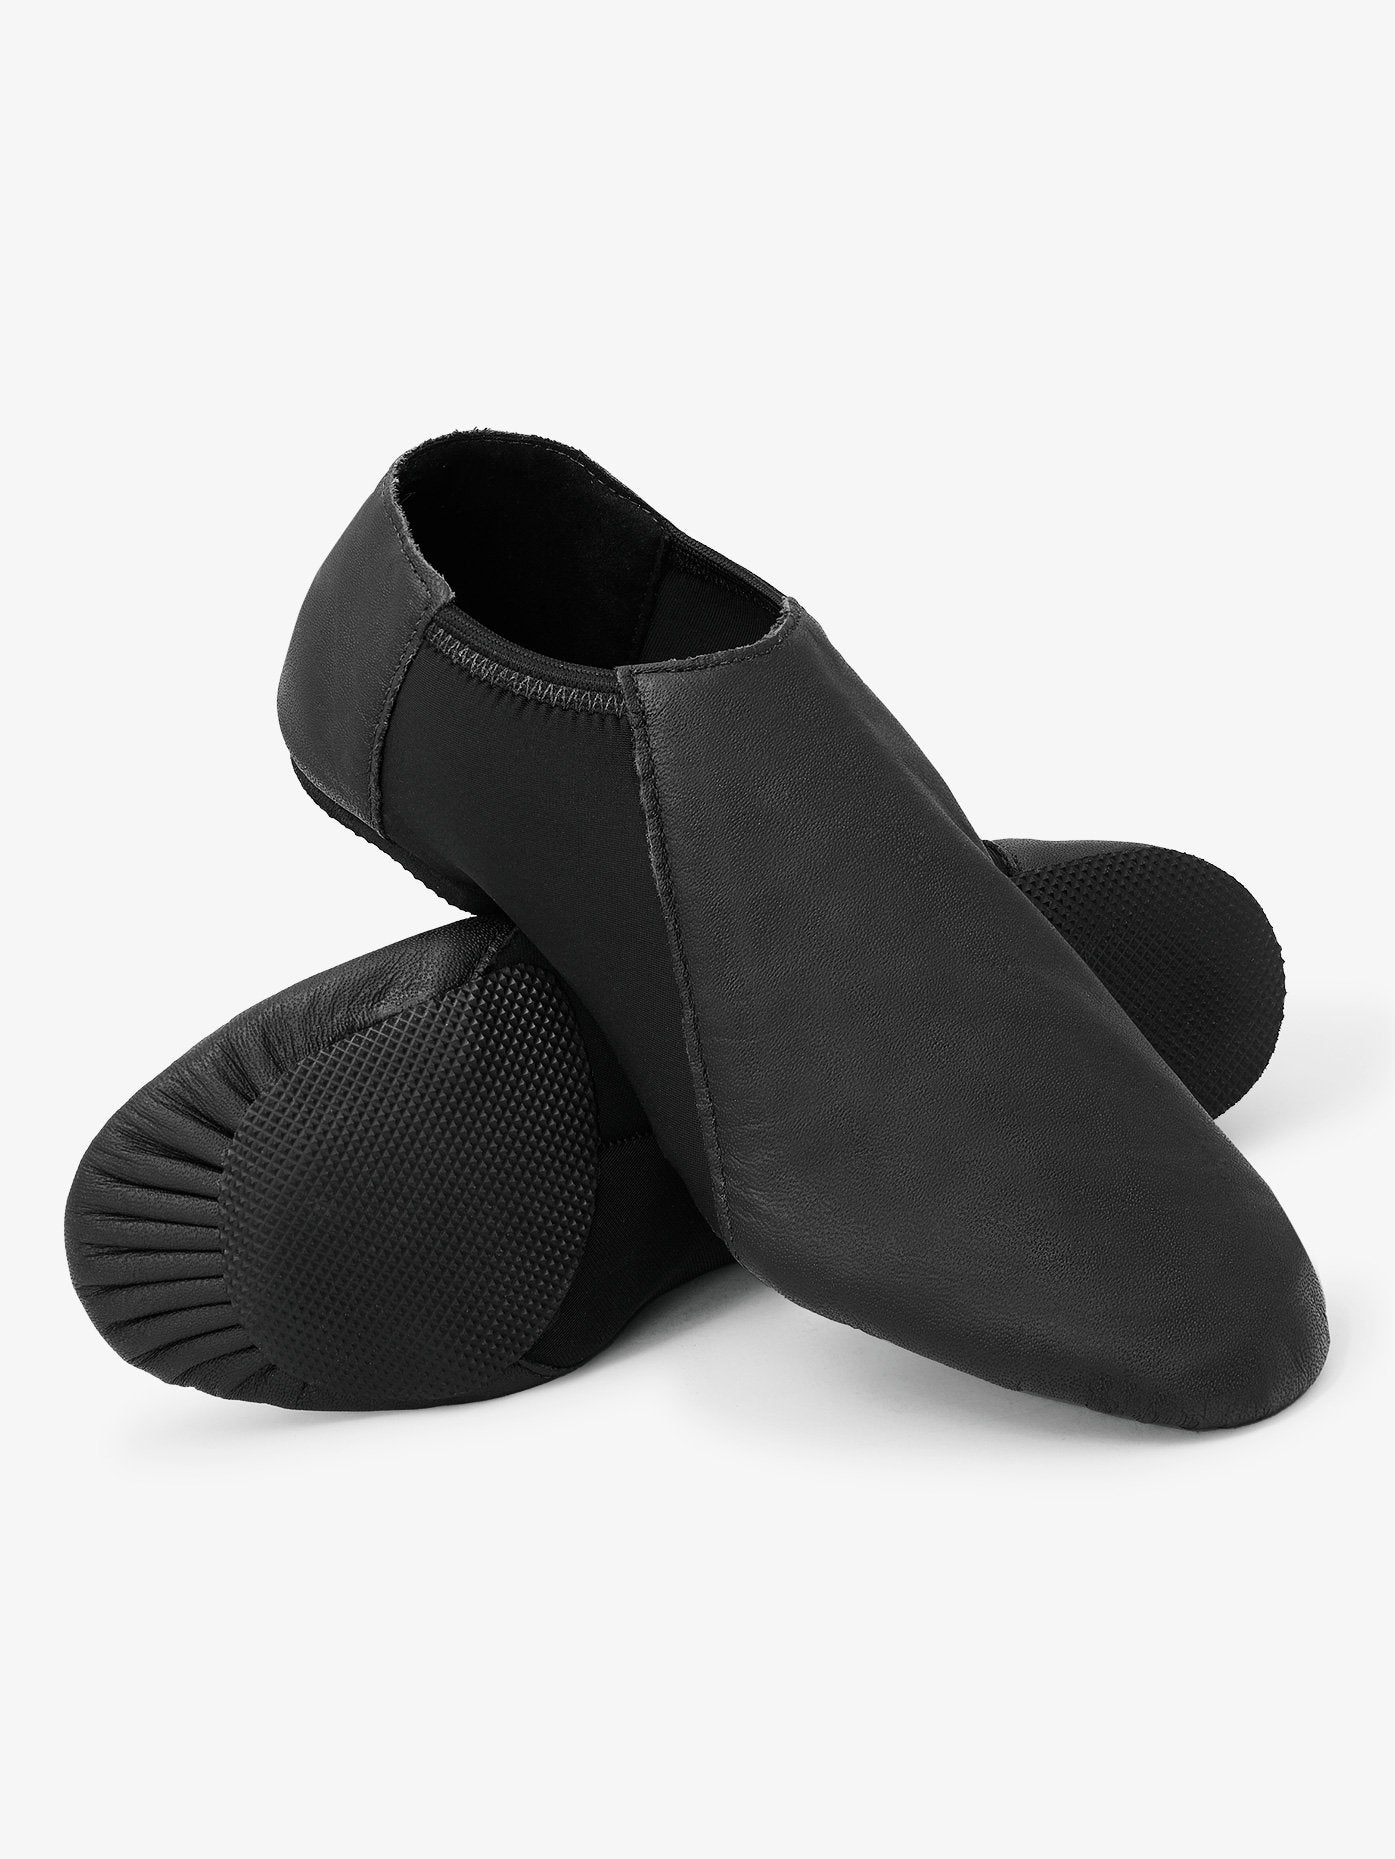 Black leather jazz shoes for women with neoprene insert